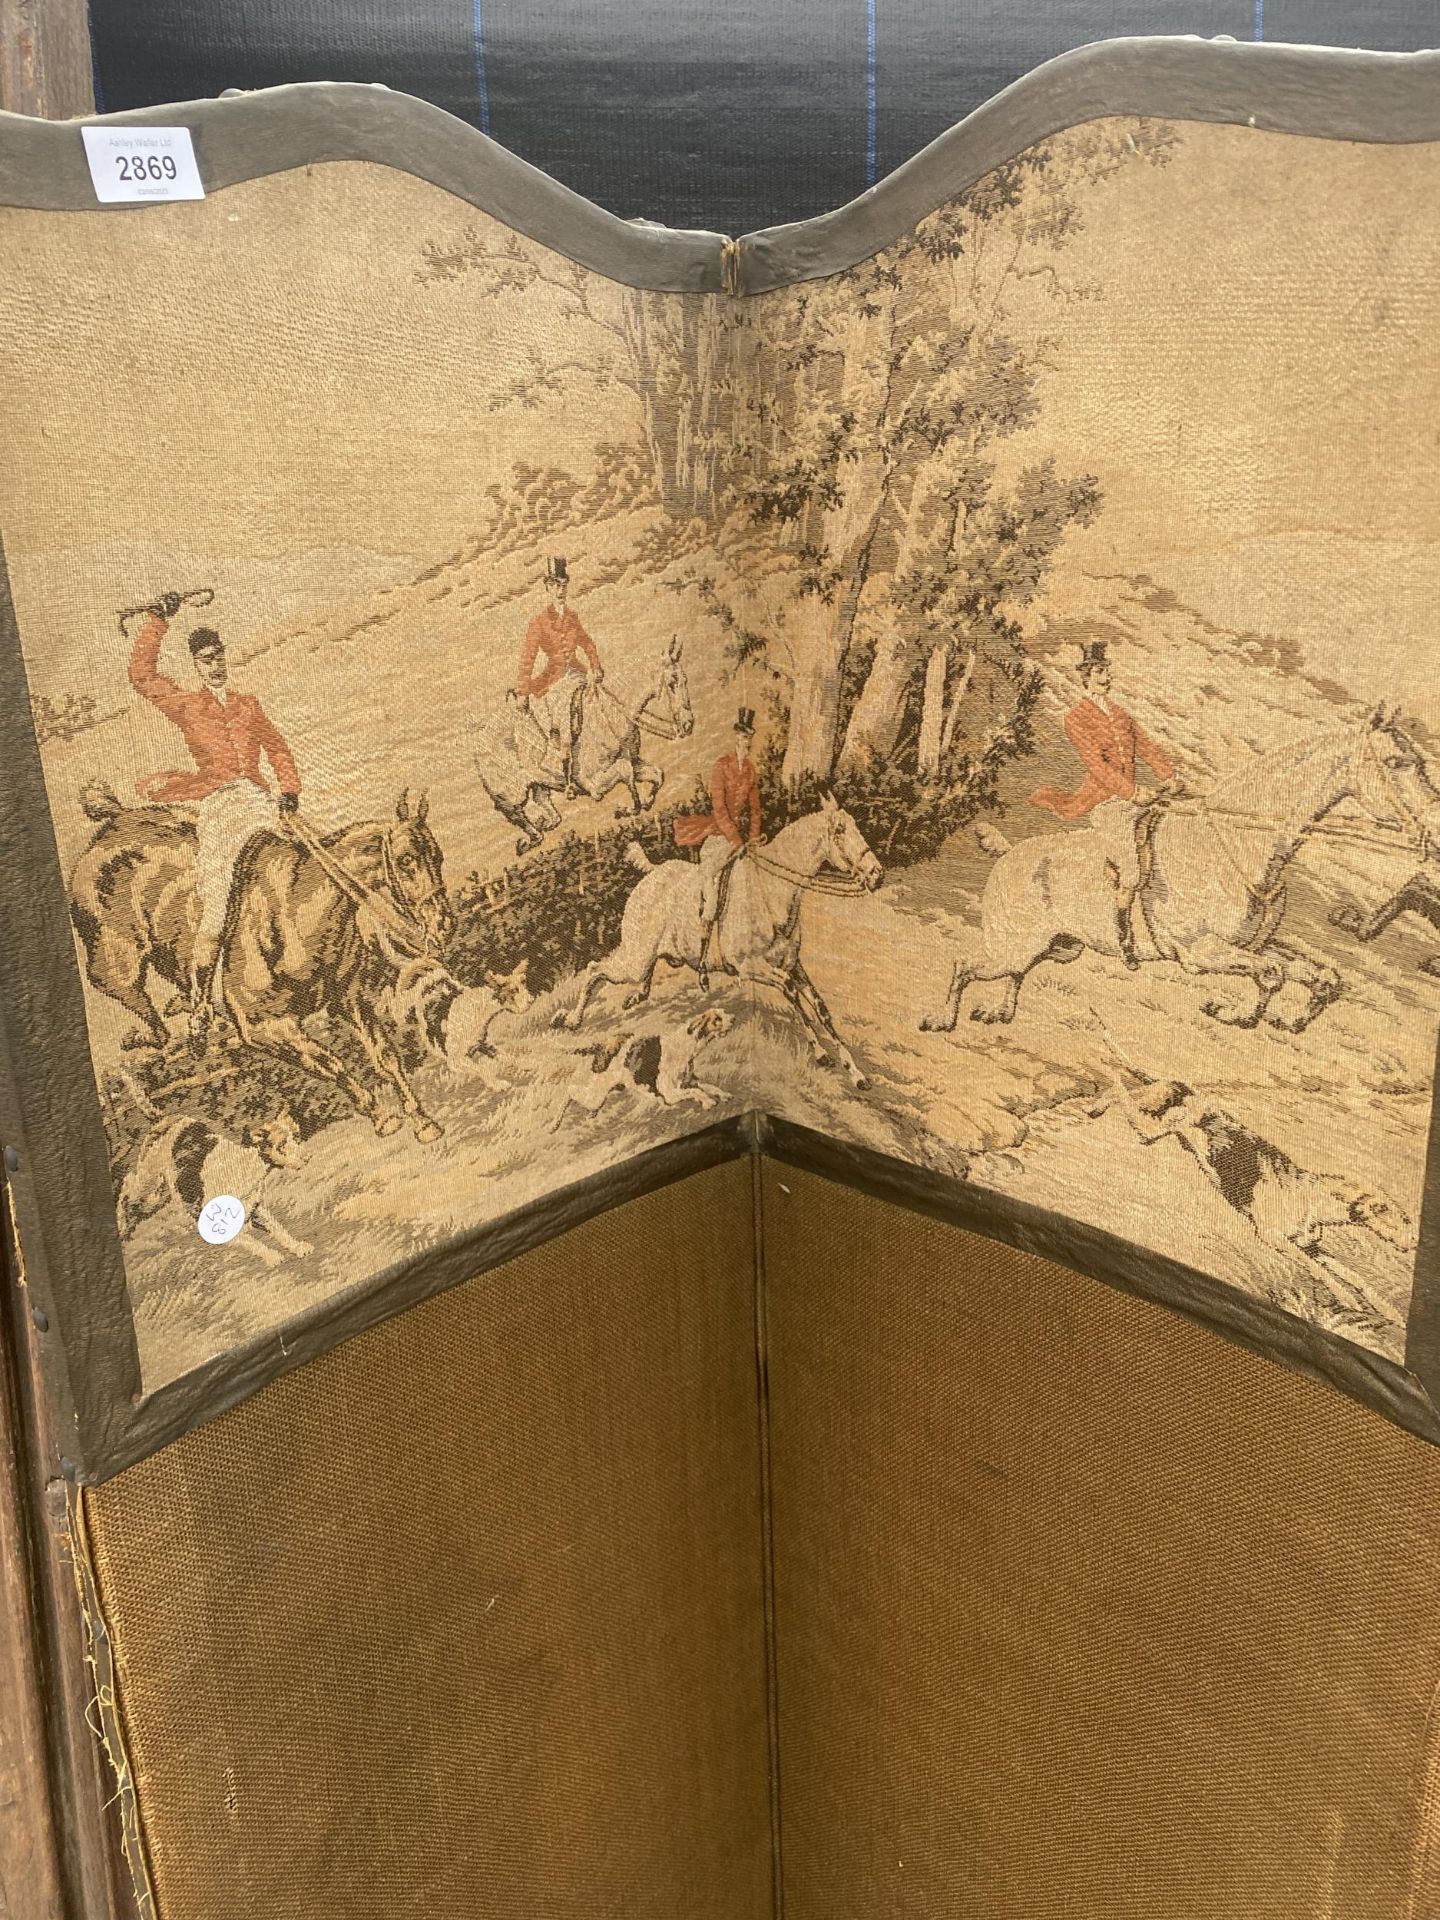 A FOUR DIVISION SCREEN DECORATED WITH HUNTING SCENES - Image 2 of 4